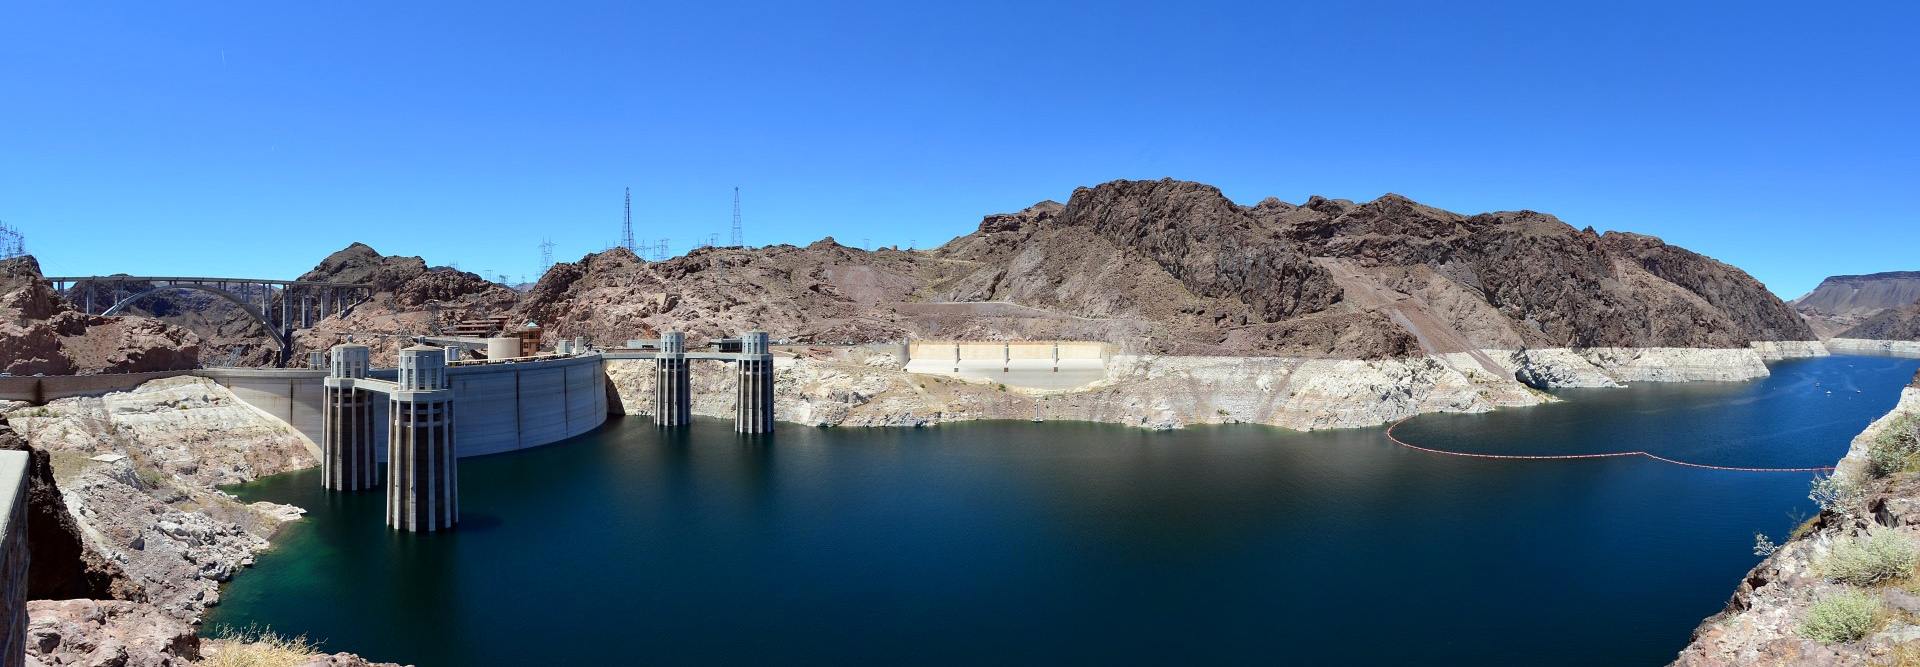 This panoramic view of Hoover Dam from the Arizona side shows the penstock towers, the Nevada-side spillway entrance and the Mike O'Callaghan—Pat Tillman Memorial Bridge. Note the “bathtub ring” due to low water levels, now lower than when this photo was taken in 2011. Ongoing drought and climate change will likely further reduce reservoir levels, already below 40 percent capacity. Photo by Crista Worthy.